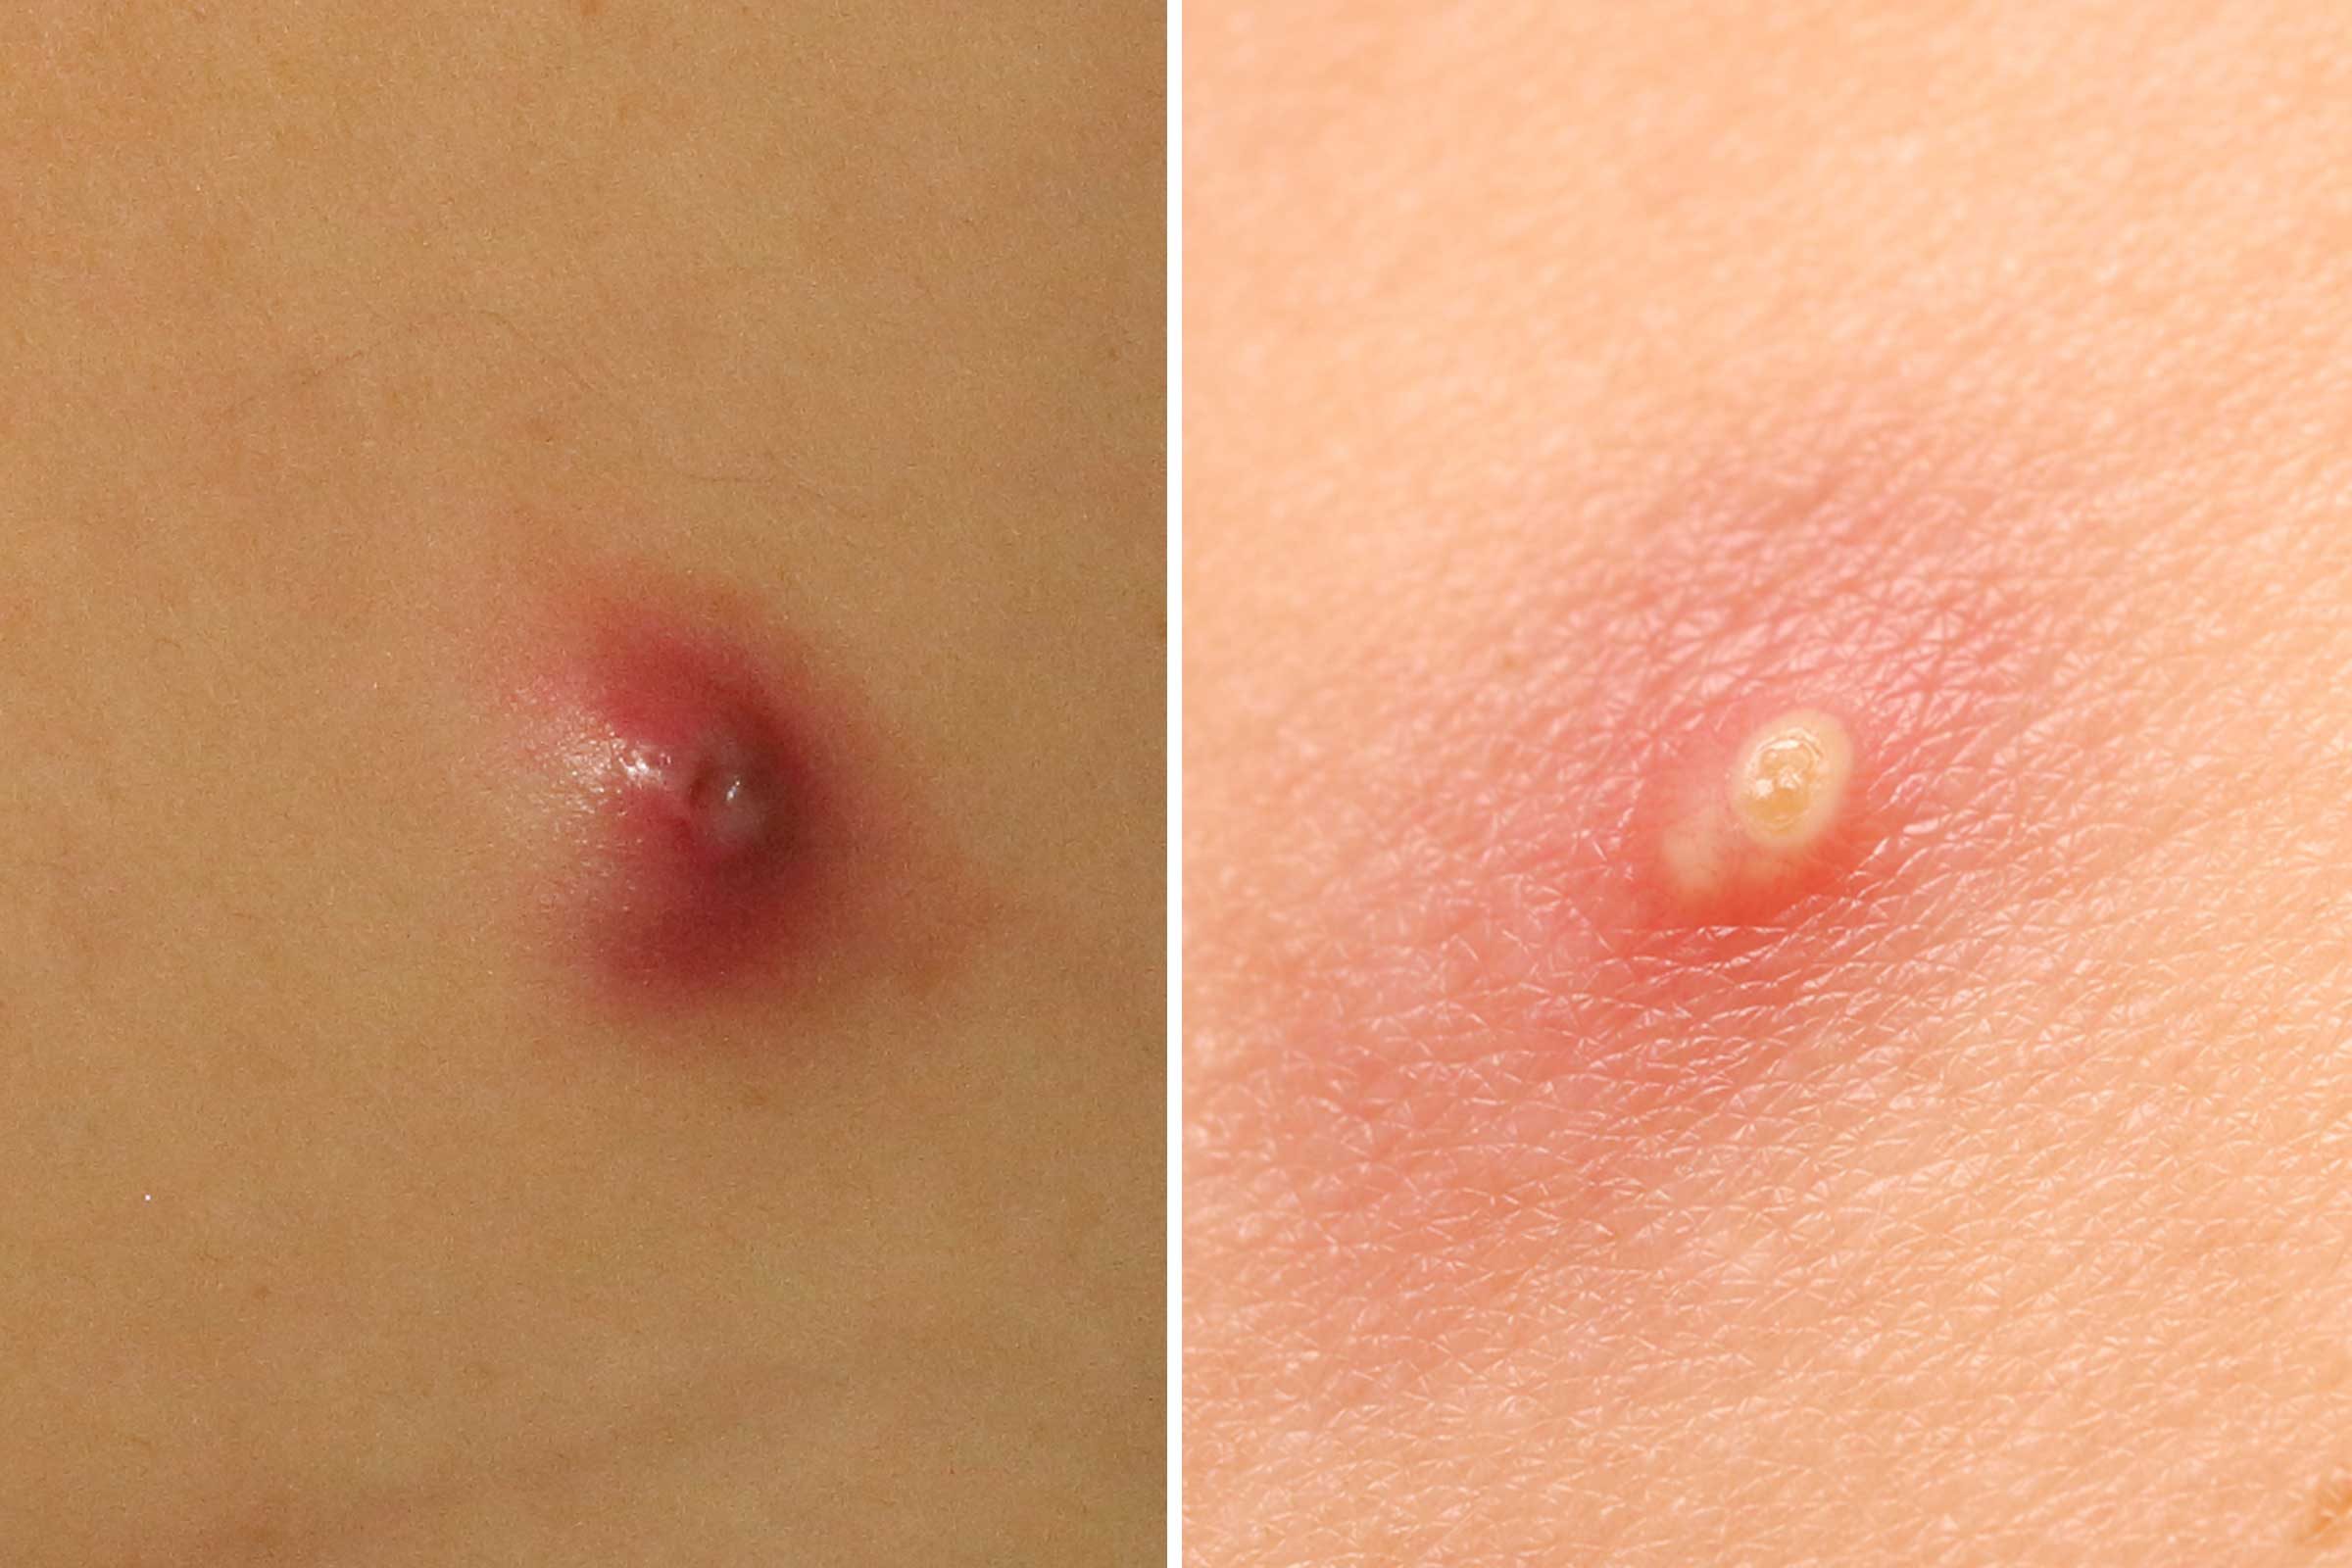 This Is the Difference Between a Pimple and a Boil